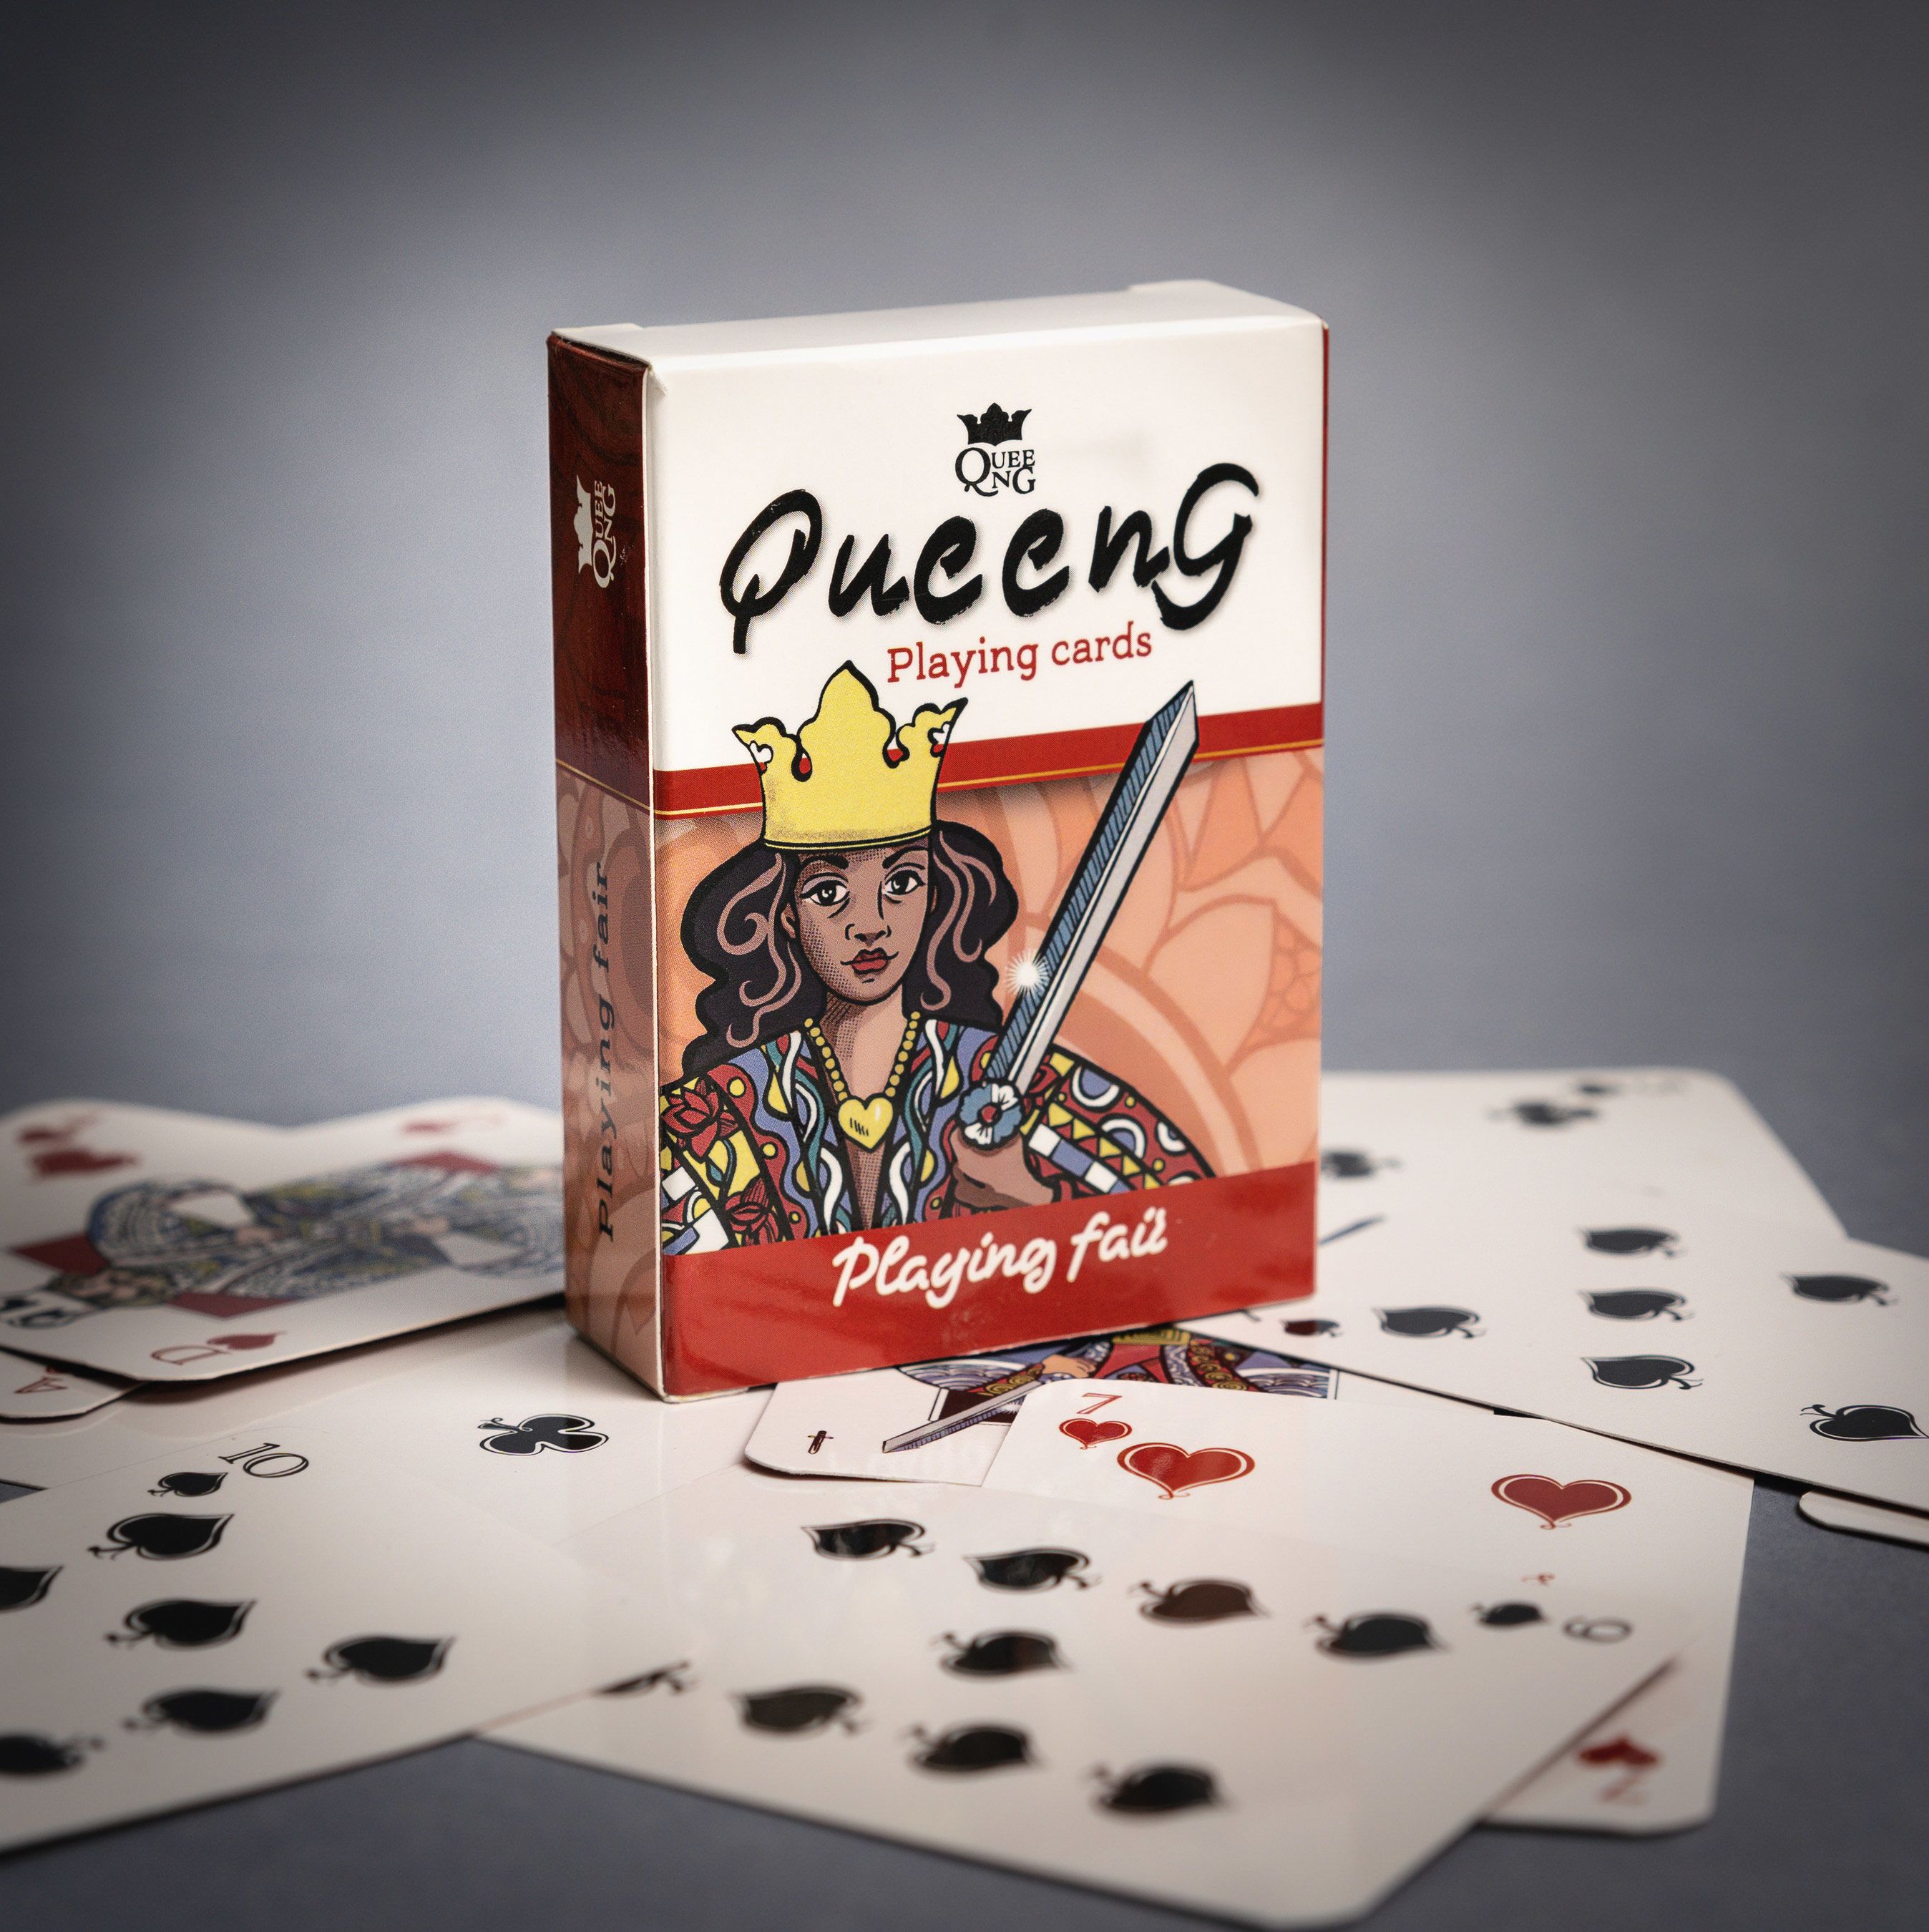 Teen invents playing cards that are gender-equal – and diverse